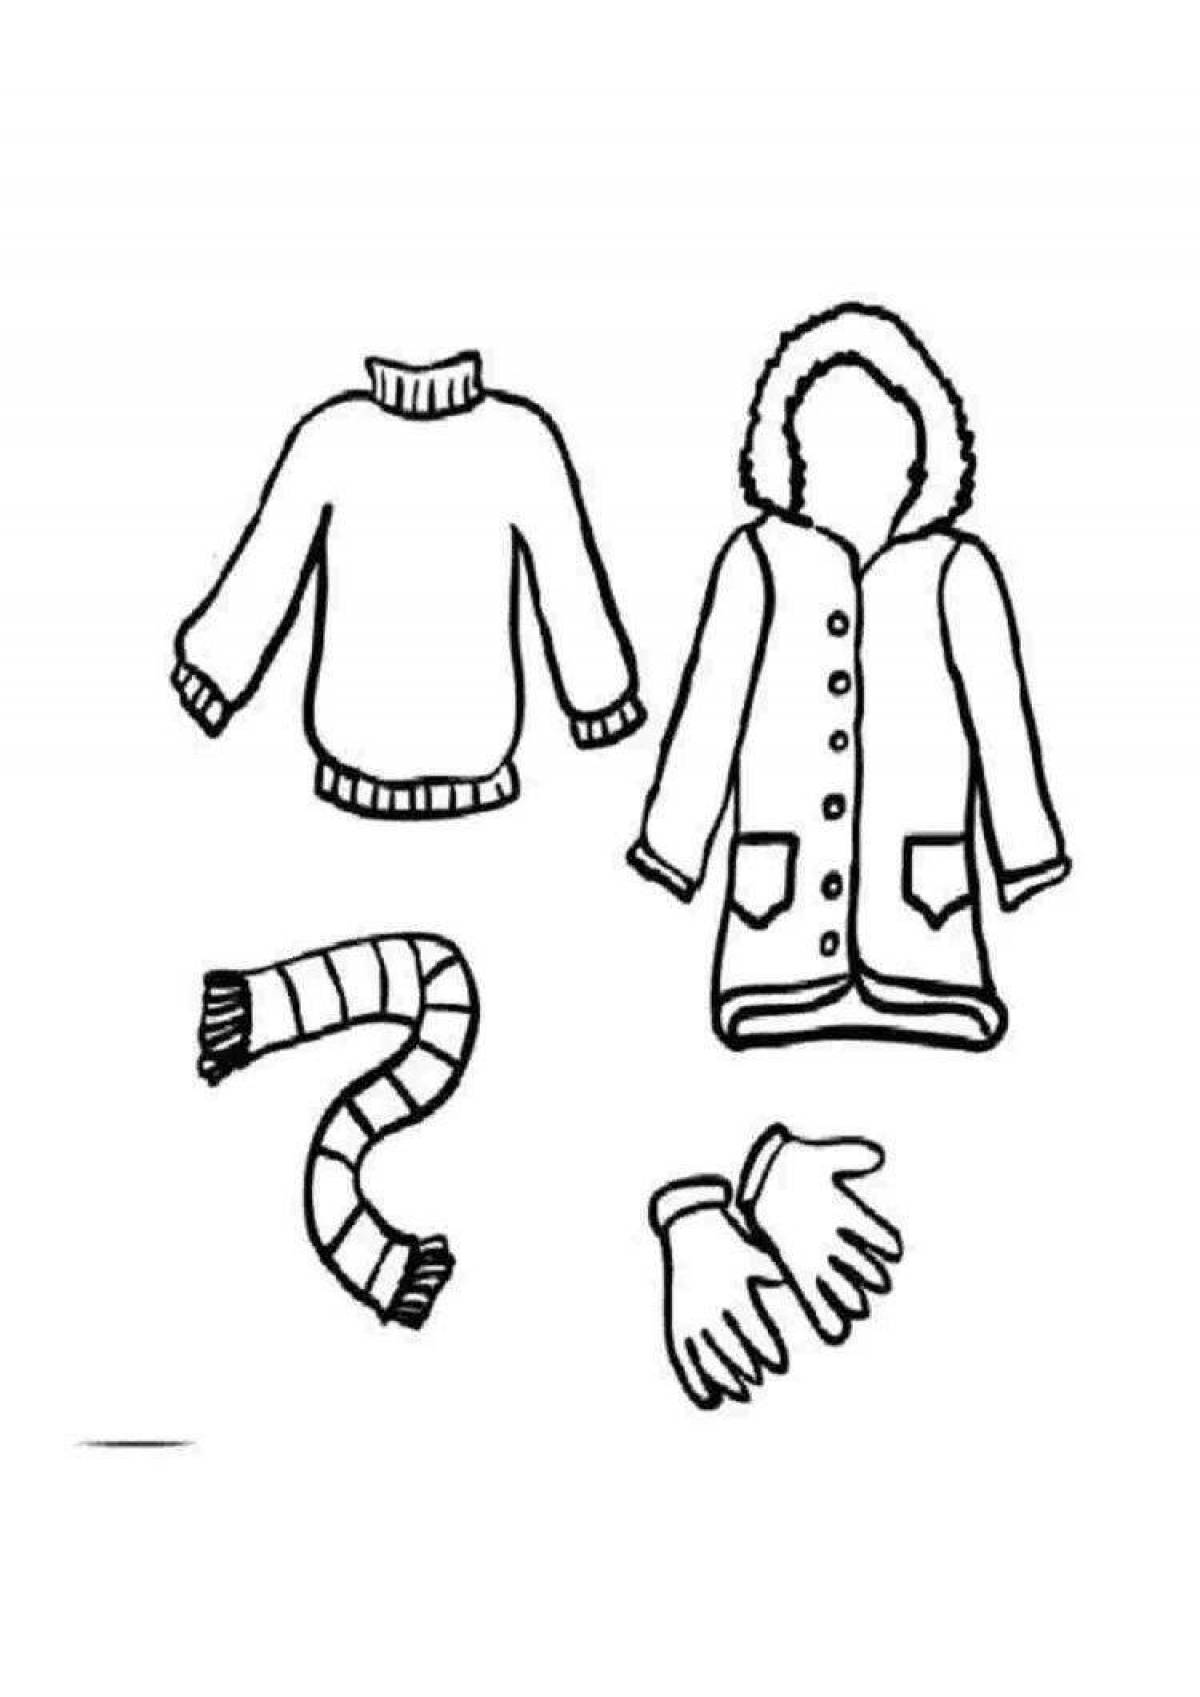 Fun winter clothes coloring page for 5-6 year olds